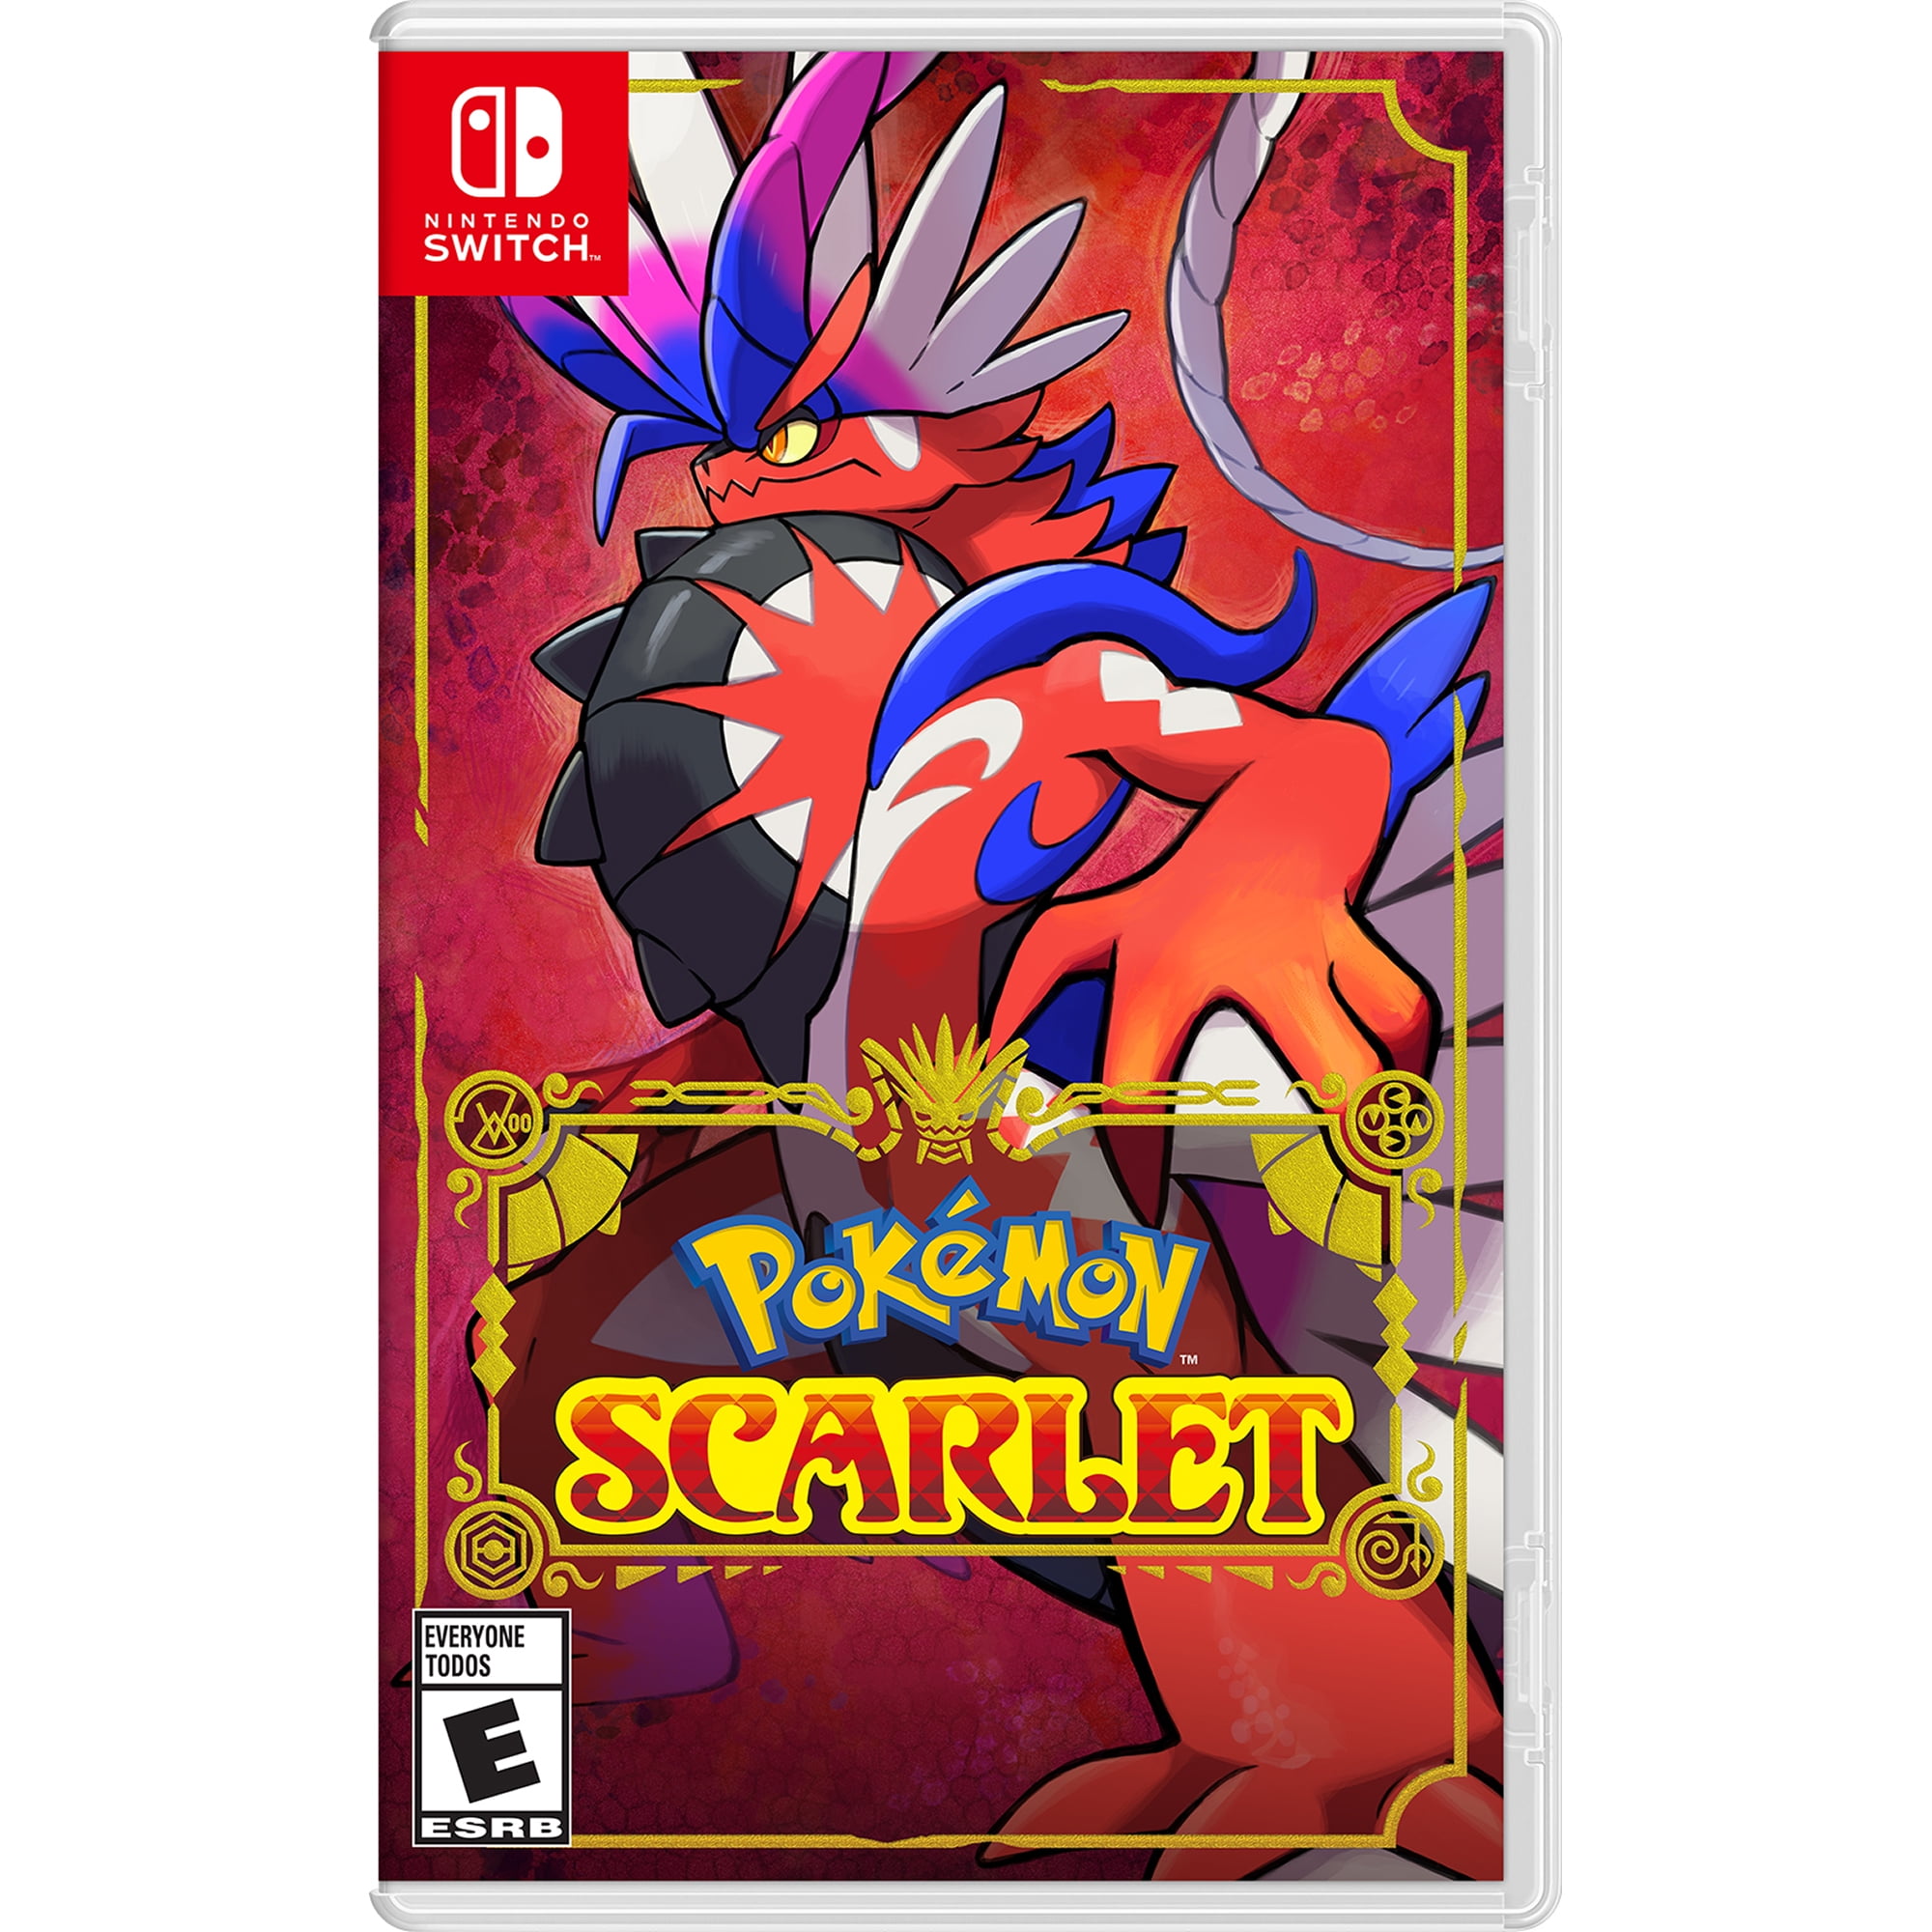 Pokémon Scarlet And Violet File Size For Switch Seemingly Revealed